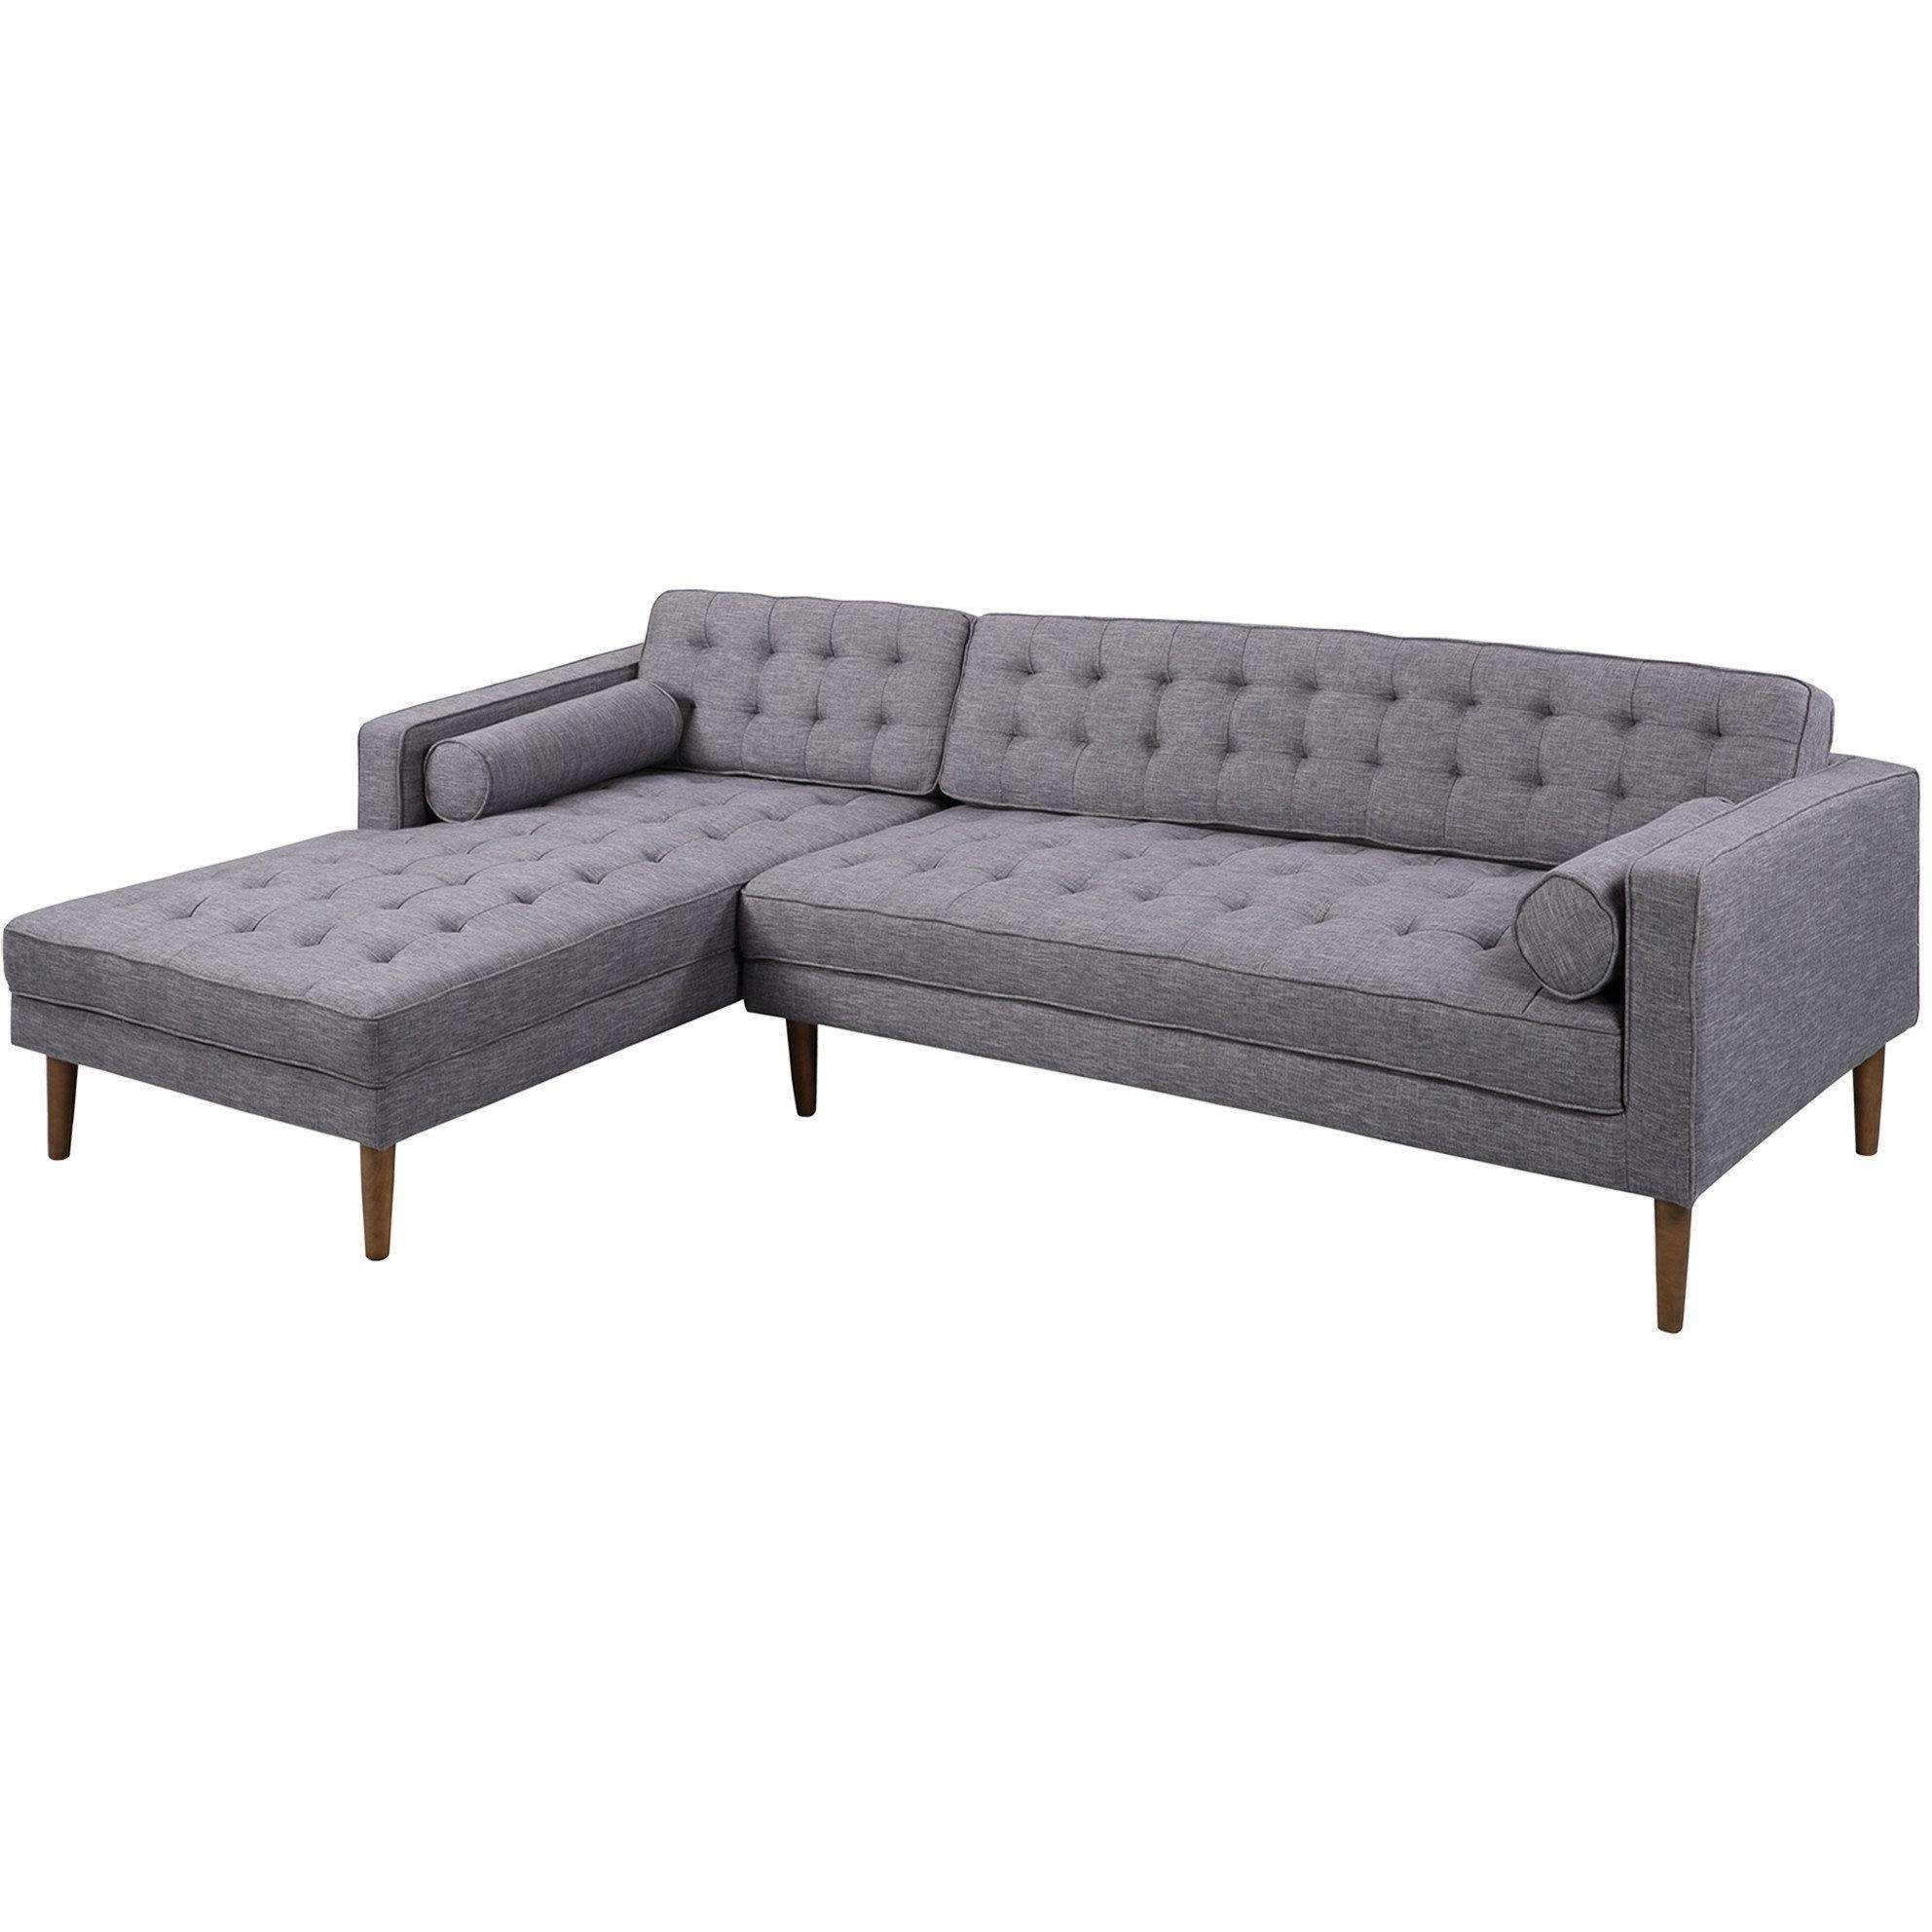 Armen Living Element Right Side Chaise Sectional In Dark In Recent Element Left Side Chaise Sectional Sofas In Dark Gray Linen And Walnut Legs (View 2 of 25)